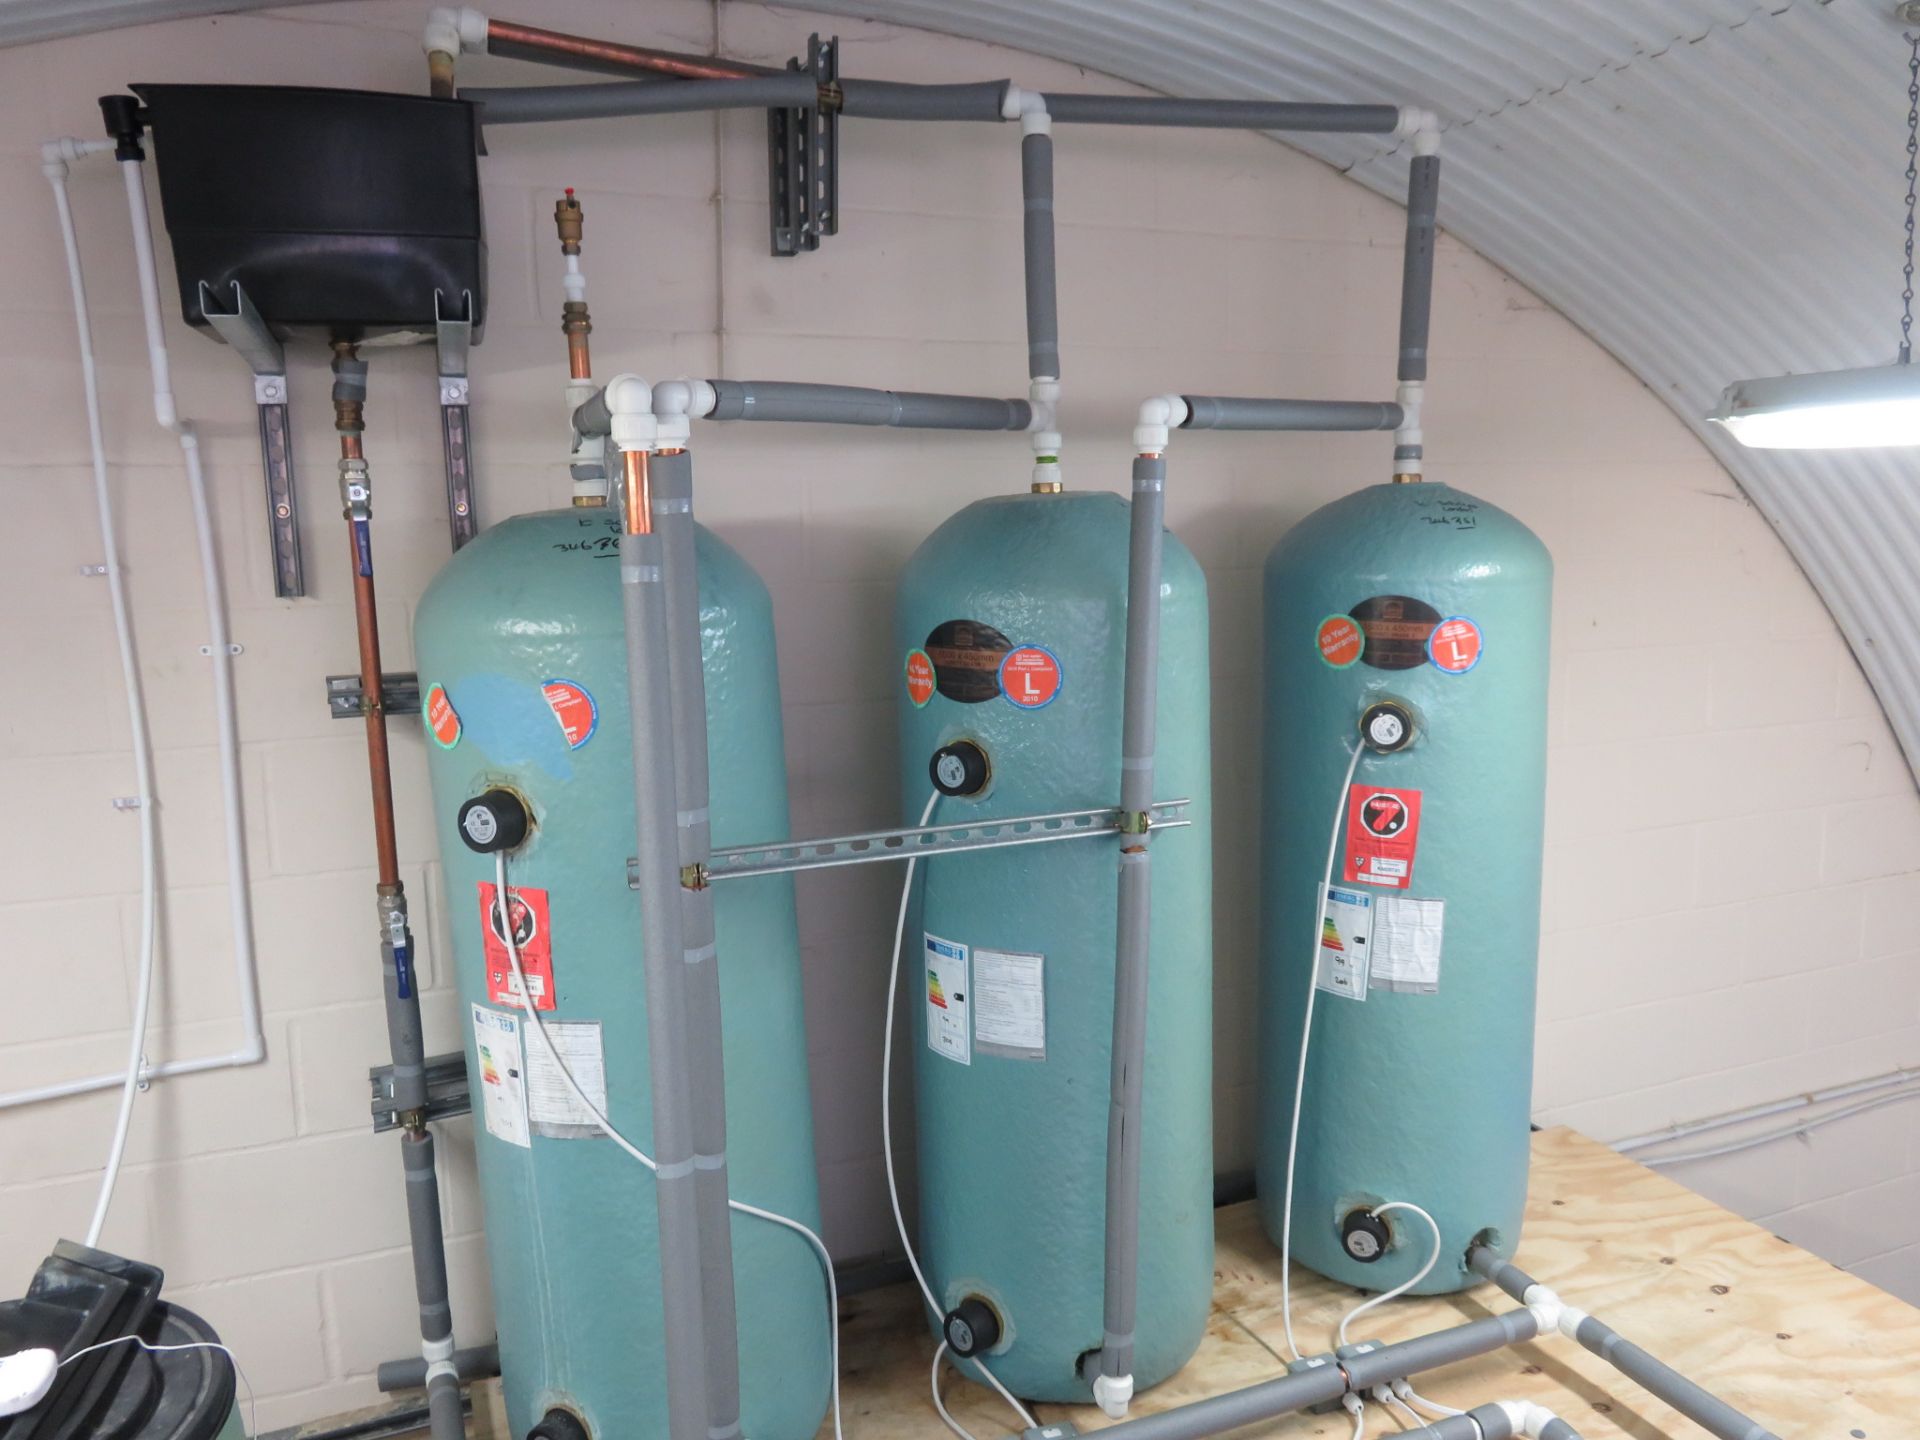 3 x Tanks heated by electric emersion tanks to heat water pumps etc, for cheese vat lot 30 LO £210. - Image 2 of 3